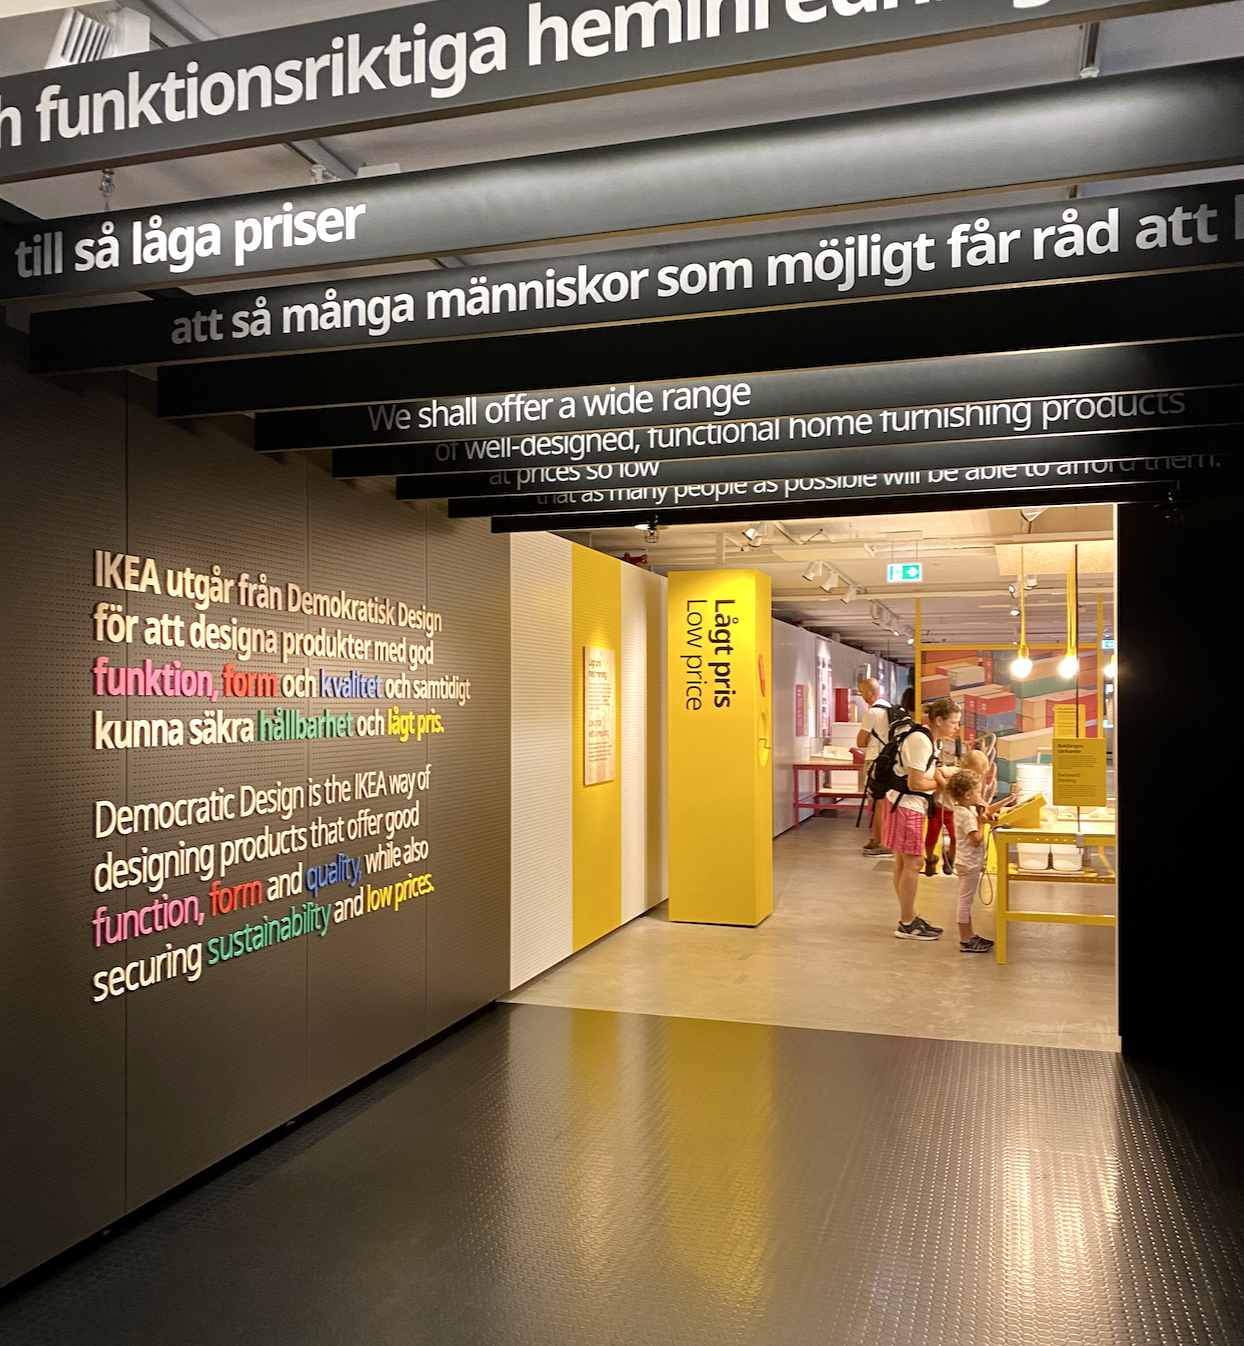 ikea museum smaland sweden.png